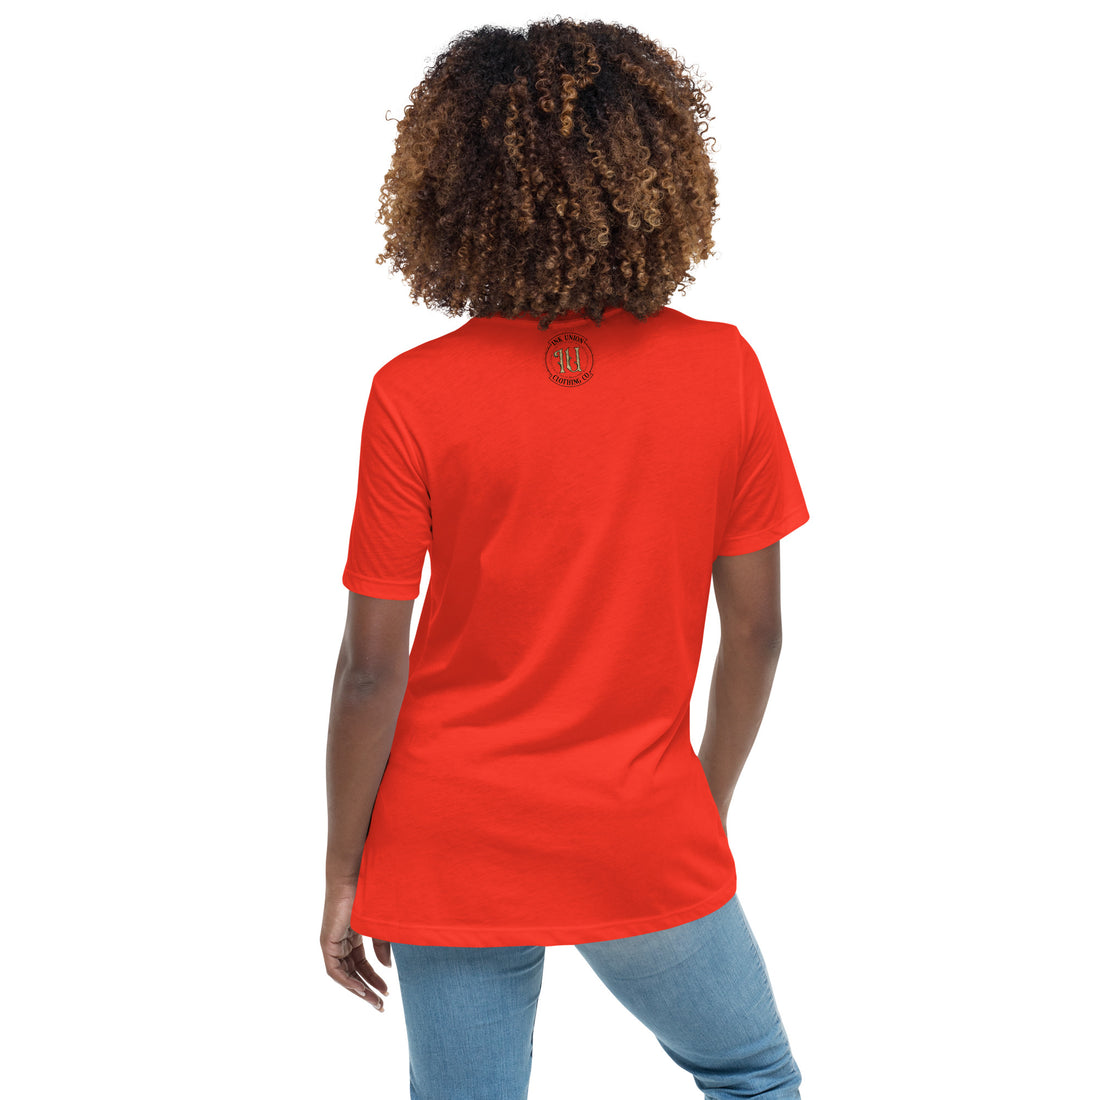 The rear view of an attractive woman wearing an Ink Union Clothing Co. poppy red t-shirt featuring the Ink Union ring logo in black and gold.